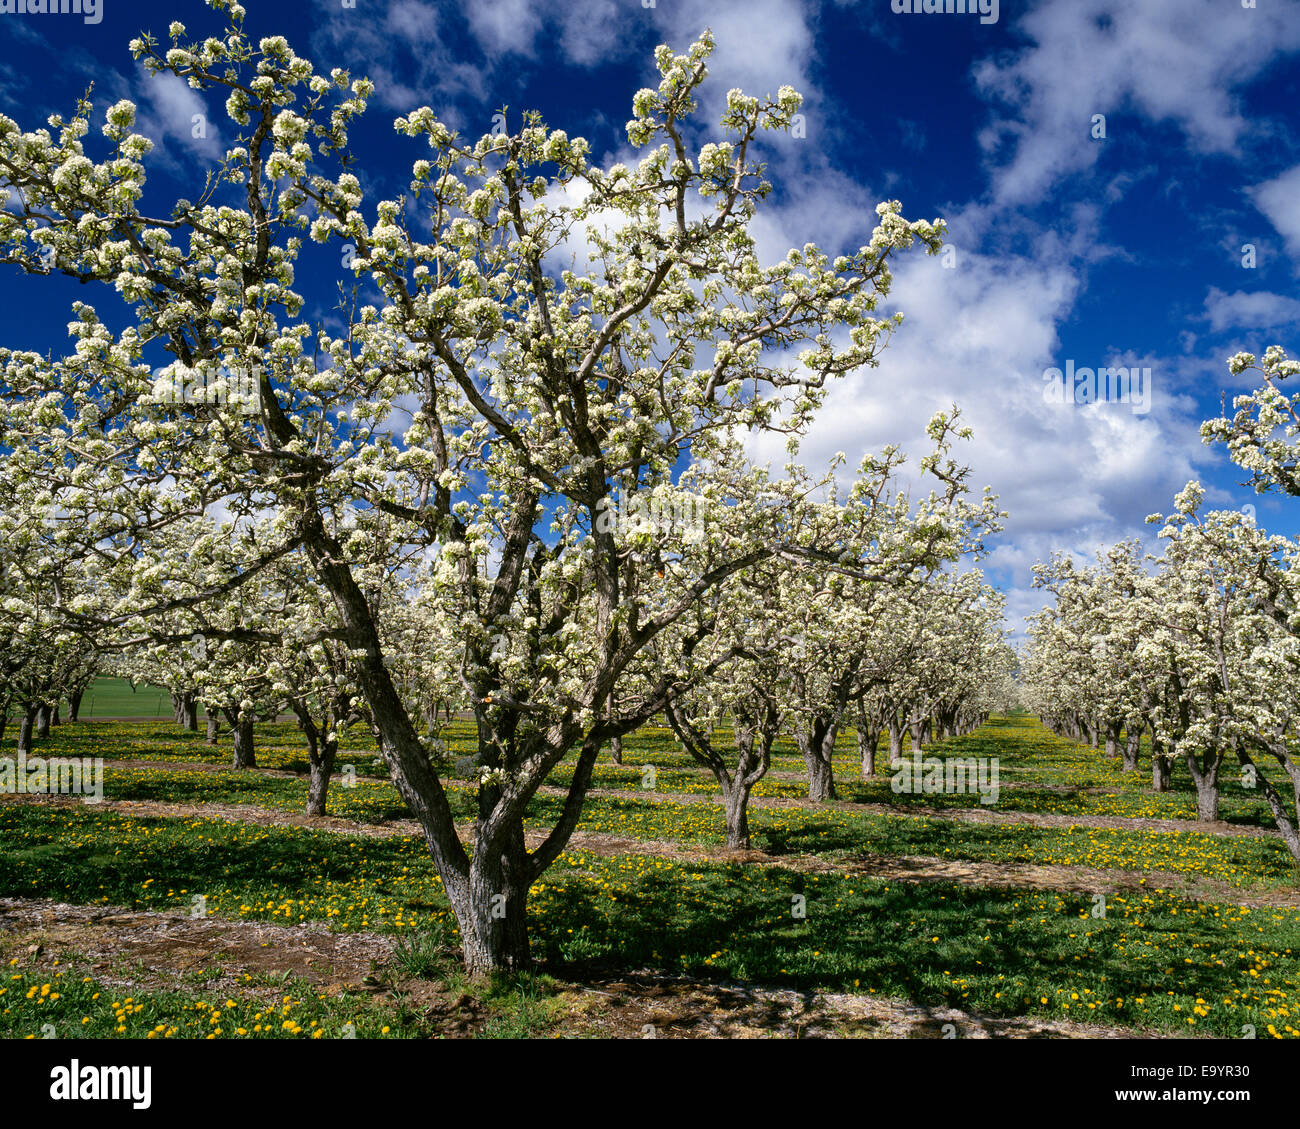 https://c8.alamy.com/comp/E9YR30/agriculture-bartlett-pear-tree-in-full-bloom-with-orchard-in-background-E9YR30.jpg